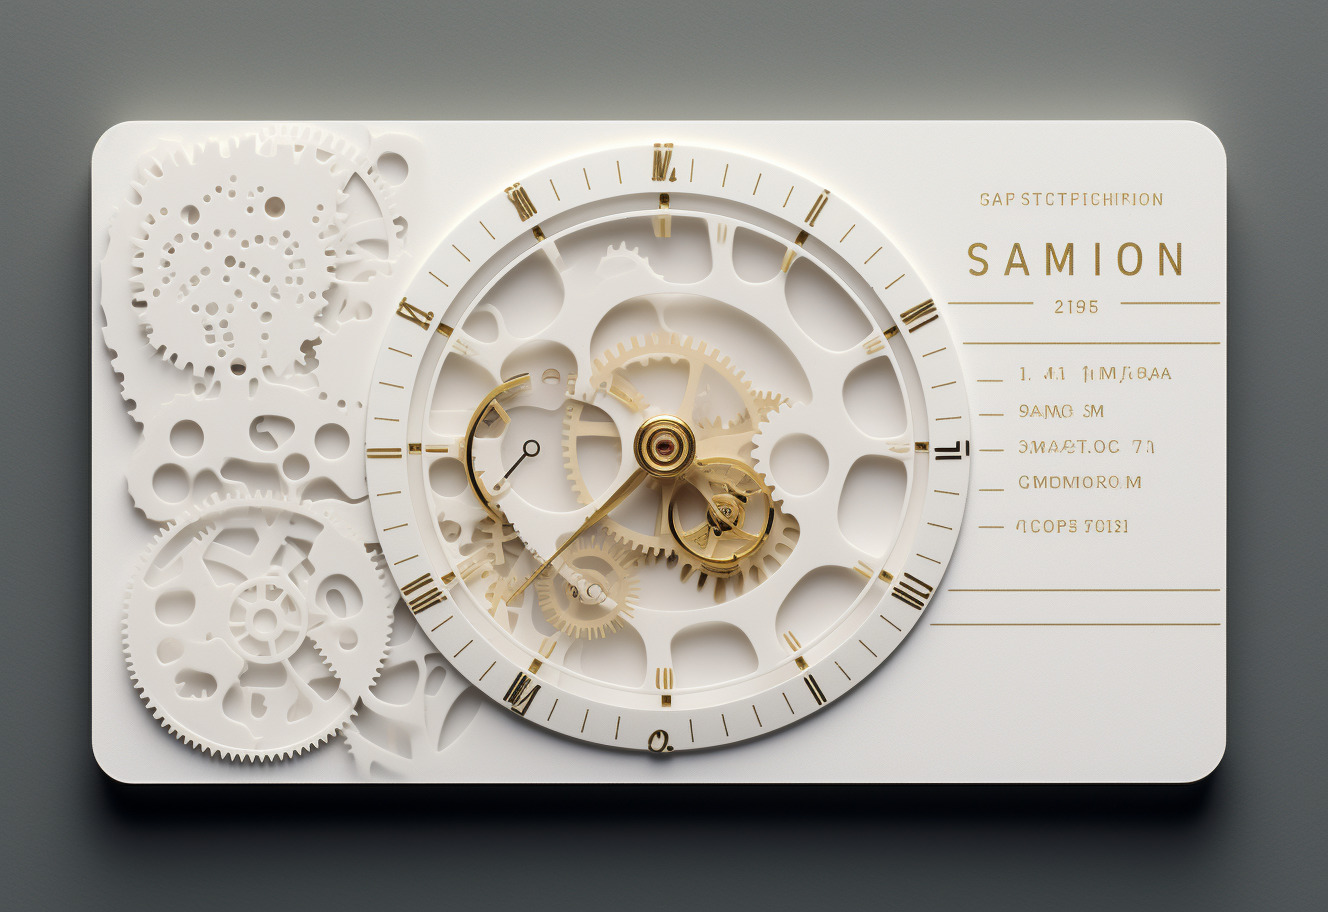 Picture Perfect: Watch-Inspired HD Business Card Designs